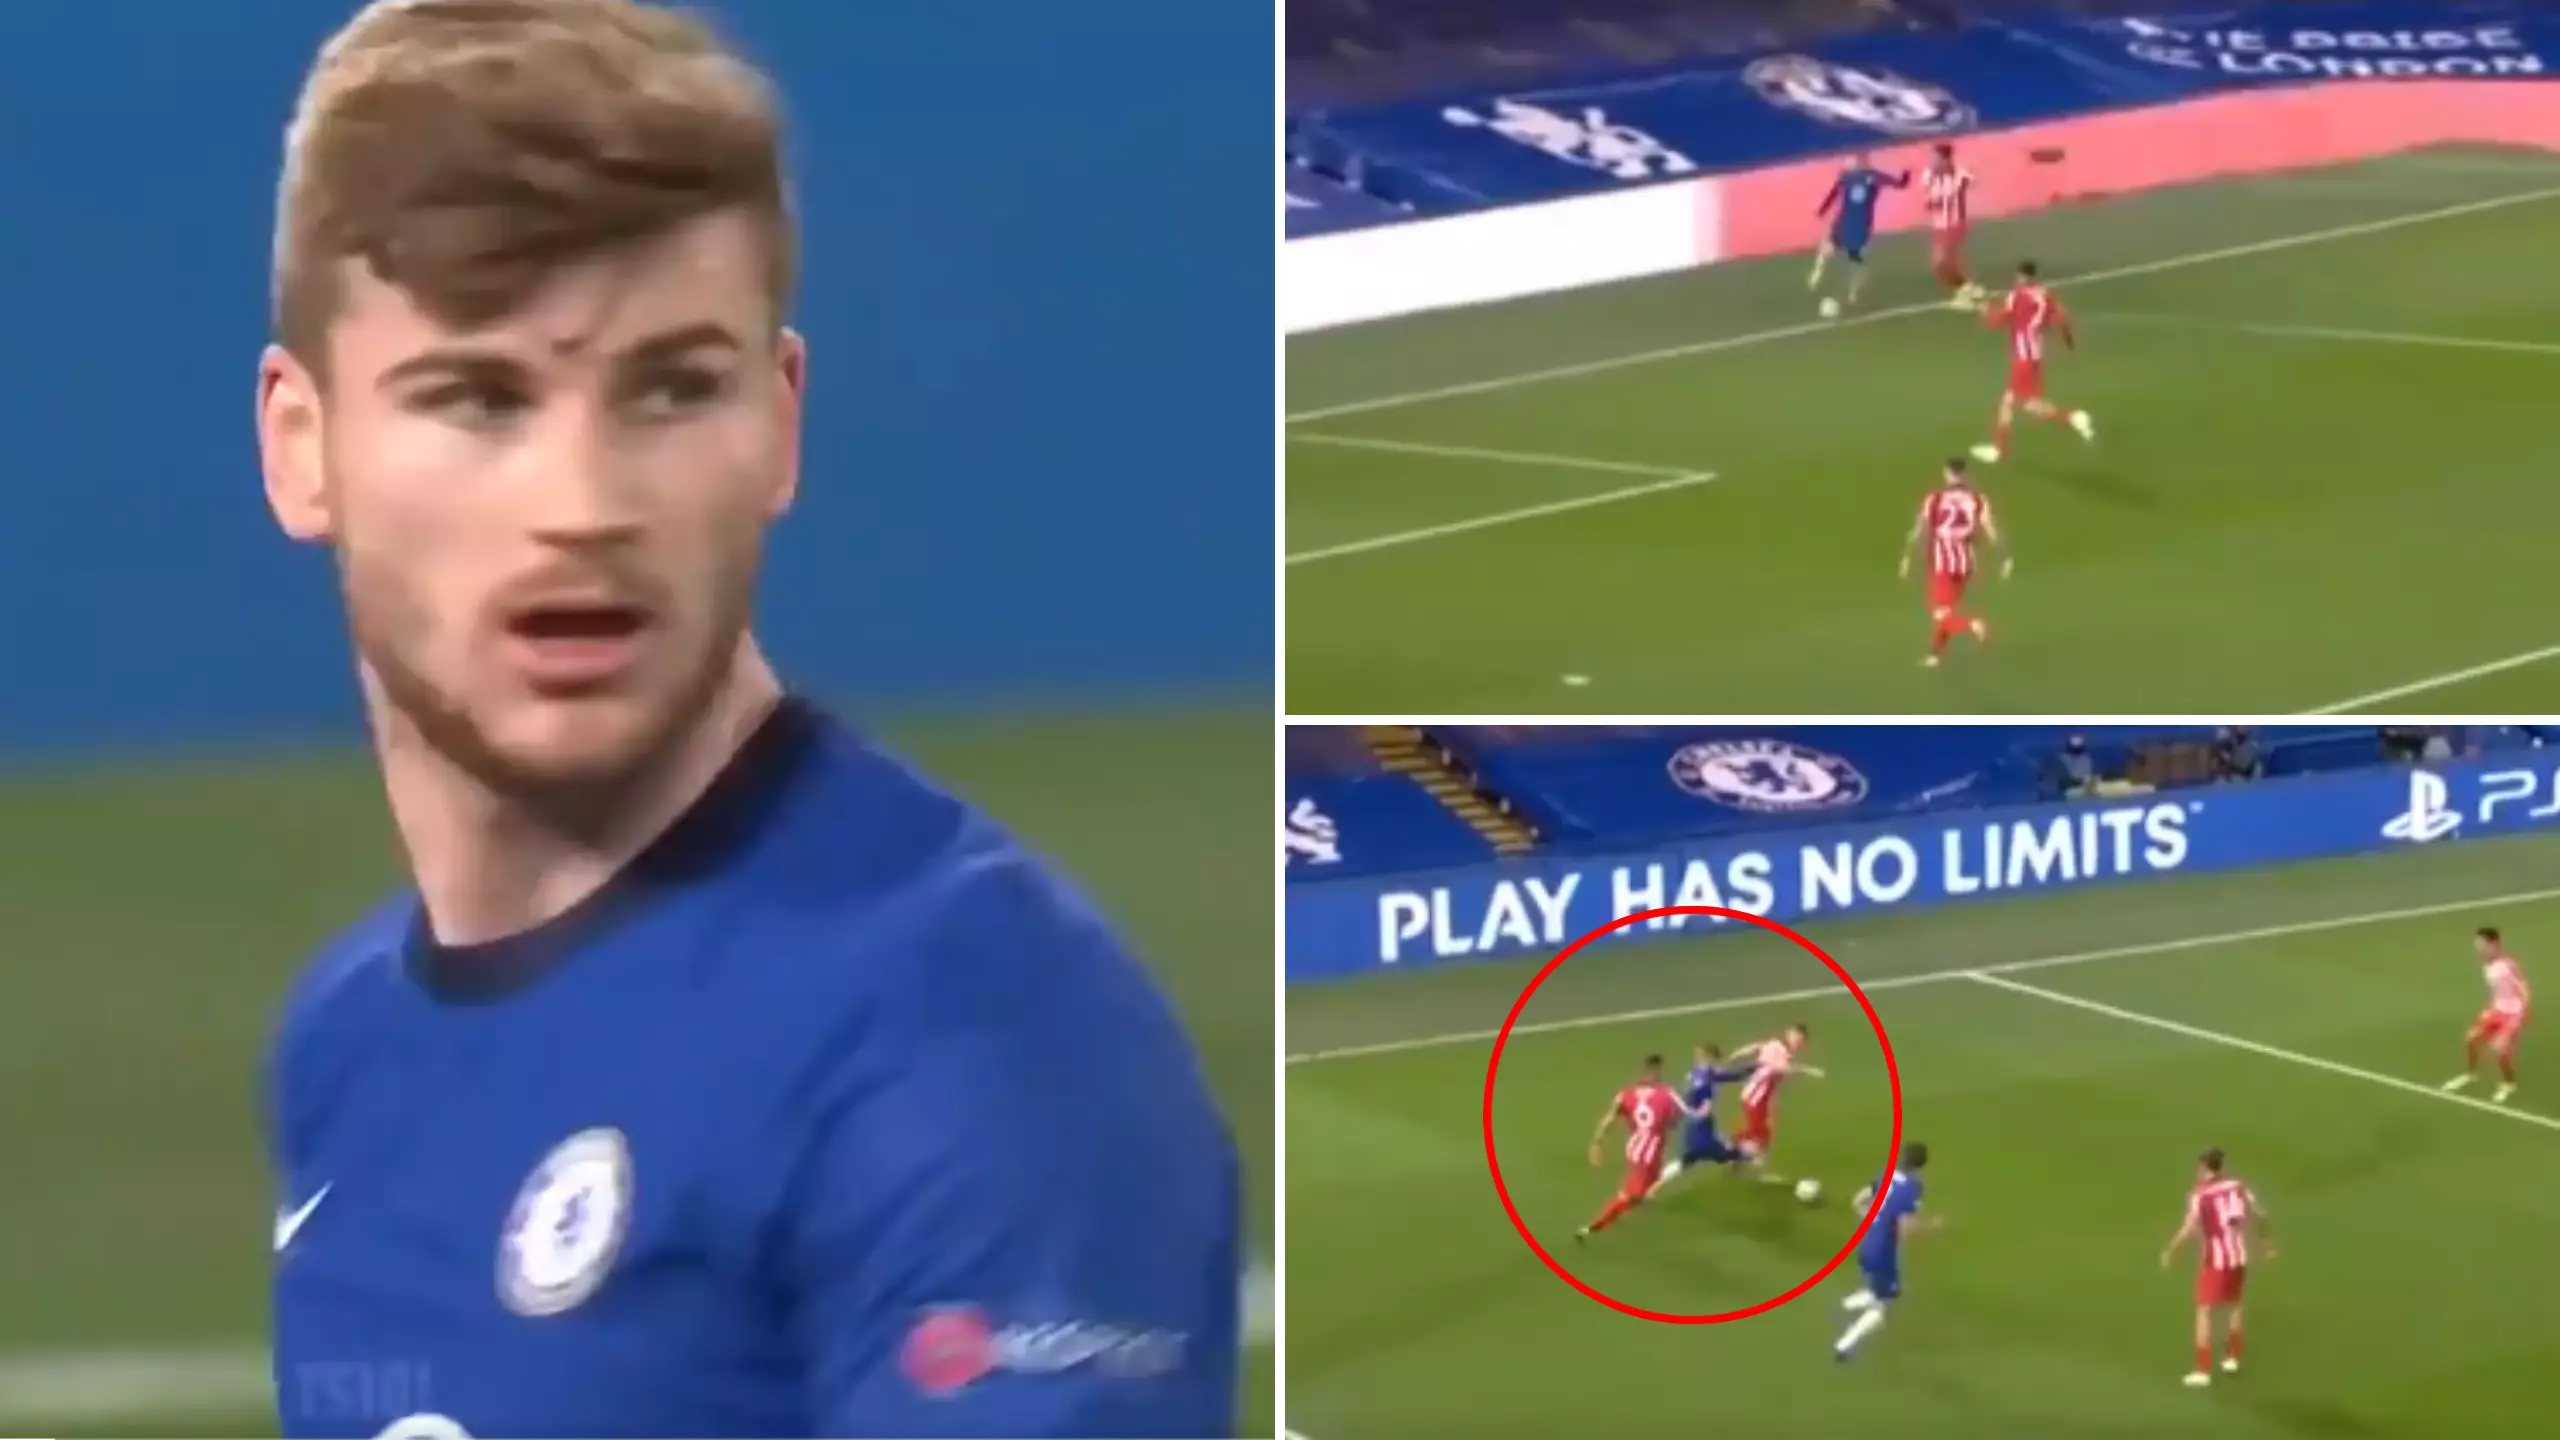 Highlights Of Timo Werner's 'Complete Centre Forward Performance' Vs Atletico Are Incredible